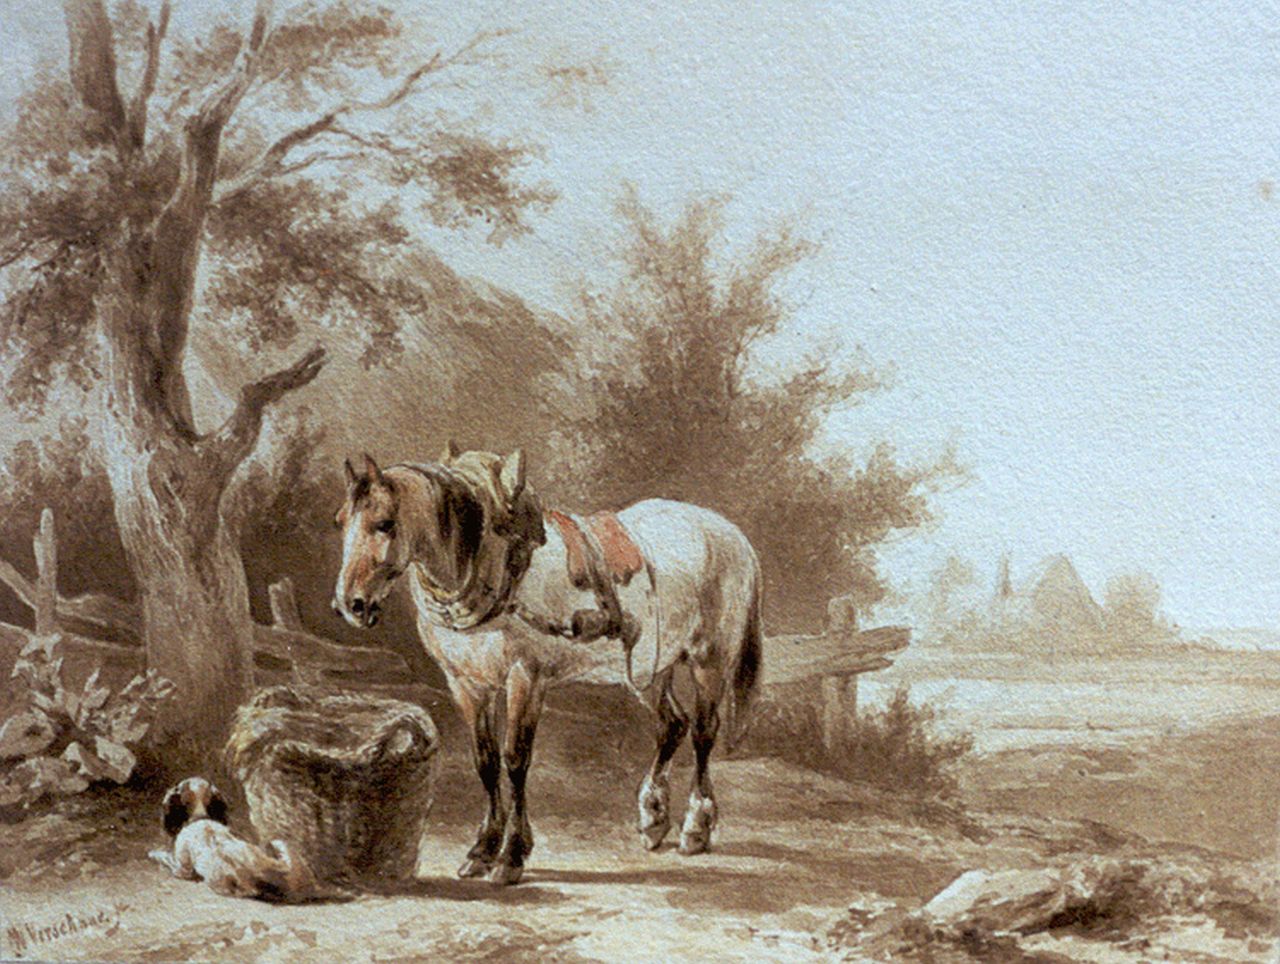 Verschuur W.  | Wouterus Verschuur, A horse and a dog in a landscape, ink on paper 13.7 x 18.0 cm, signed l.l.